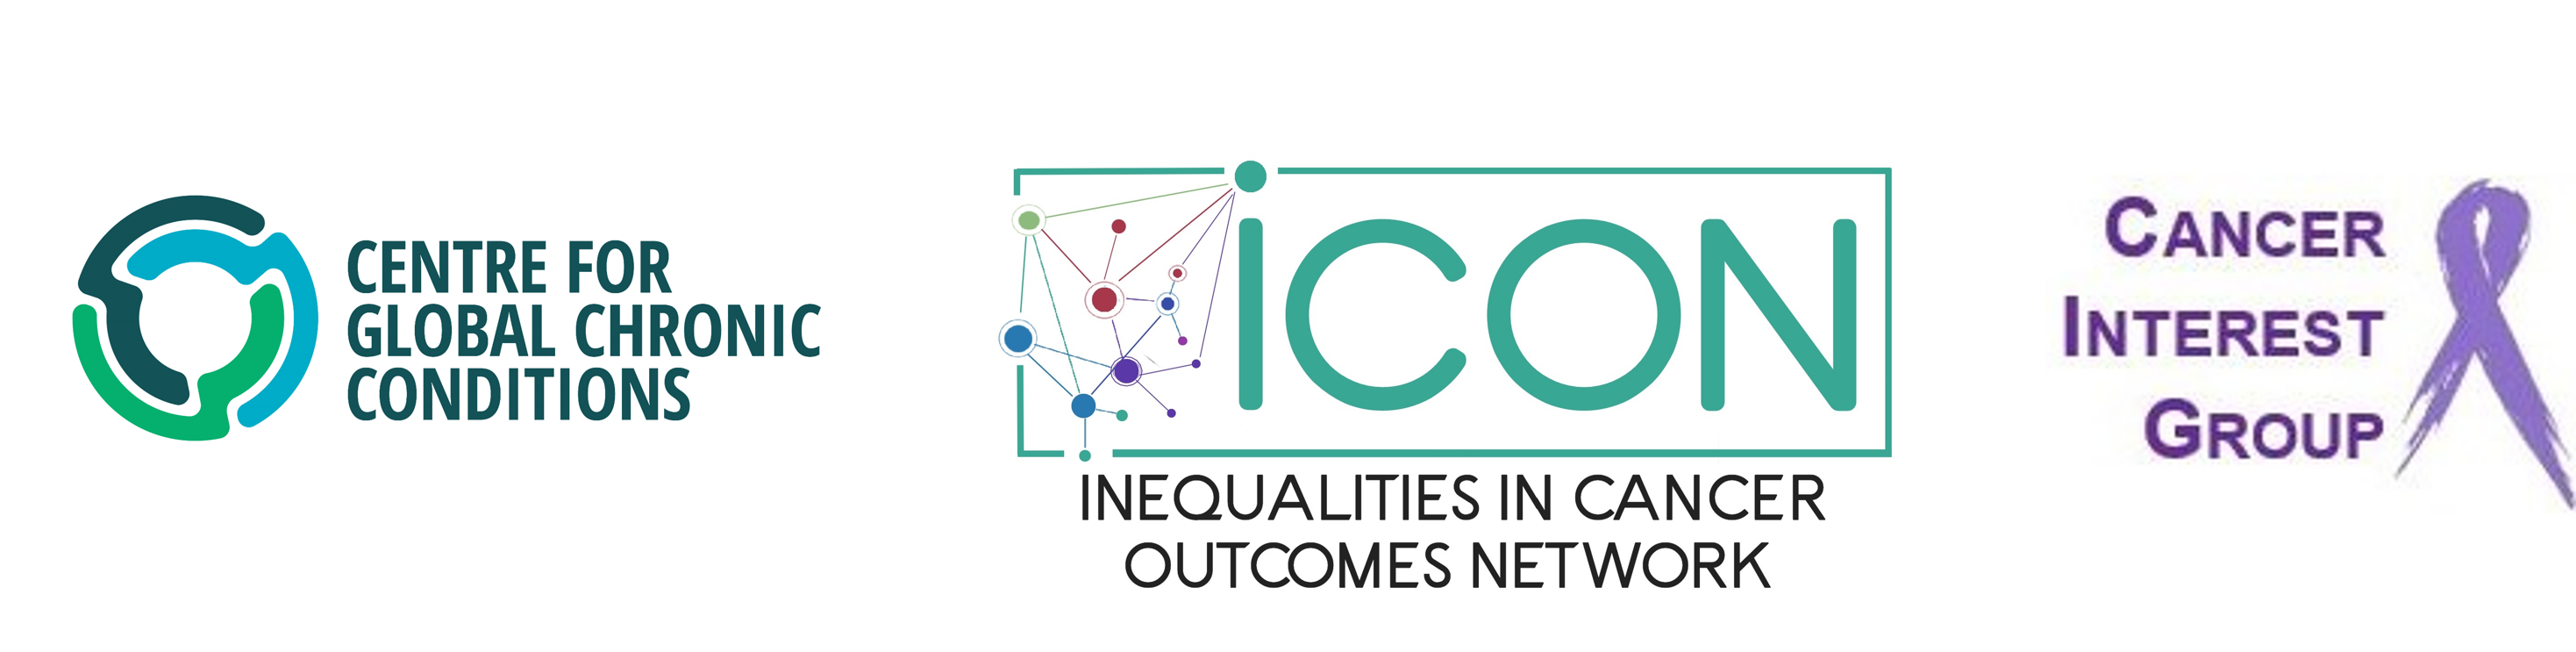 Collaborators logo - Centre for Global Chronic Conditions, Inequalities in Cancer Outcomes Network and Cancer Interest group